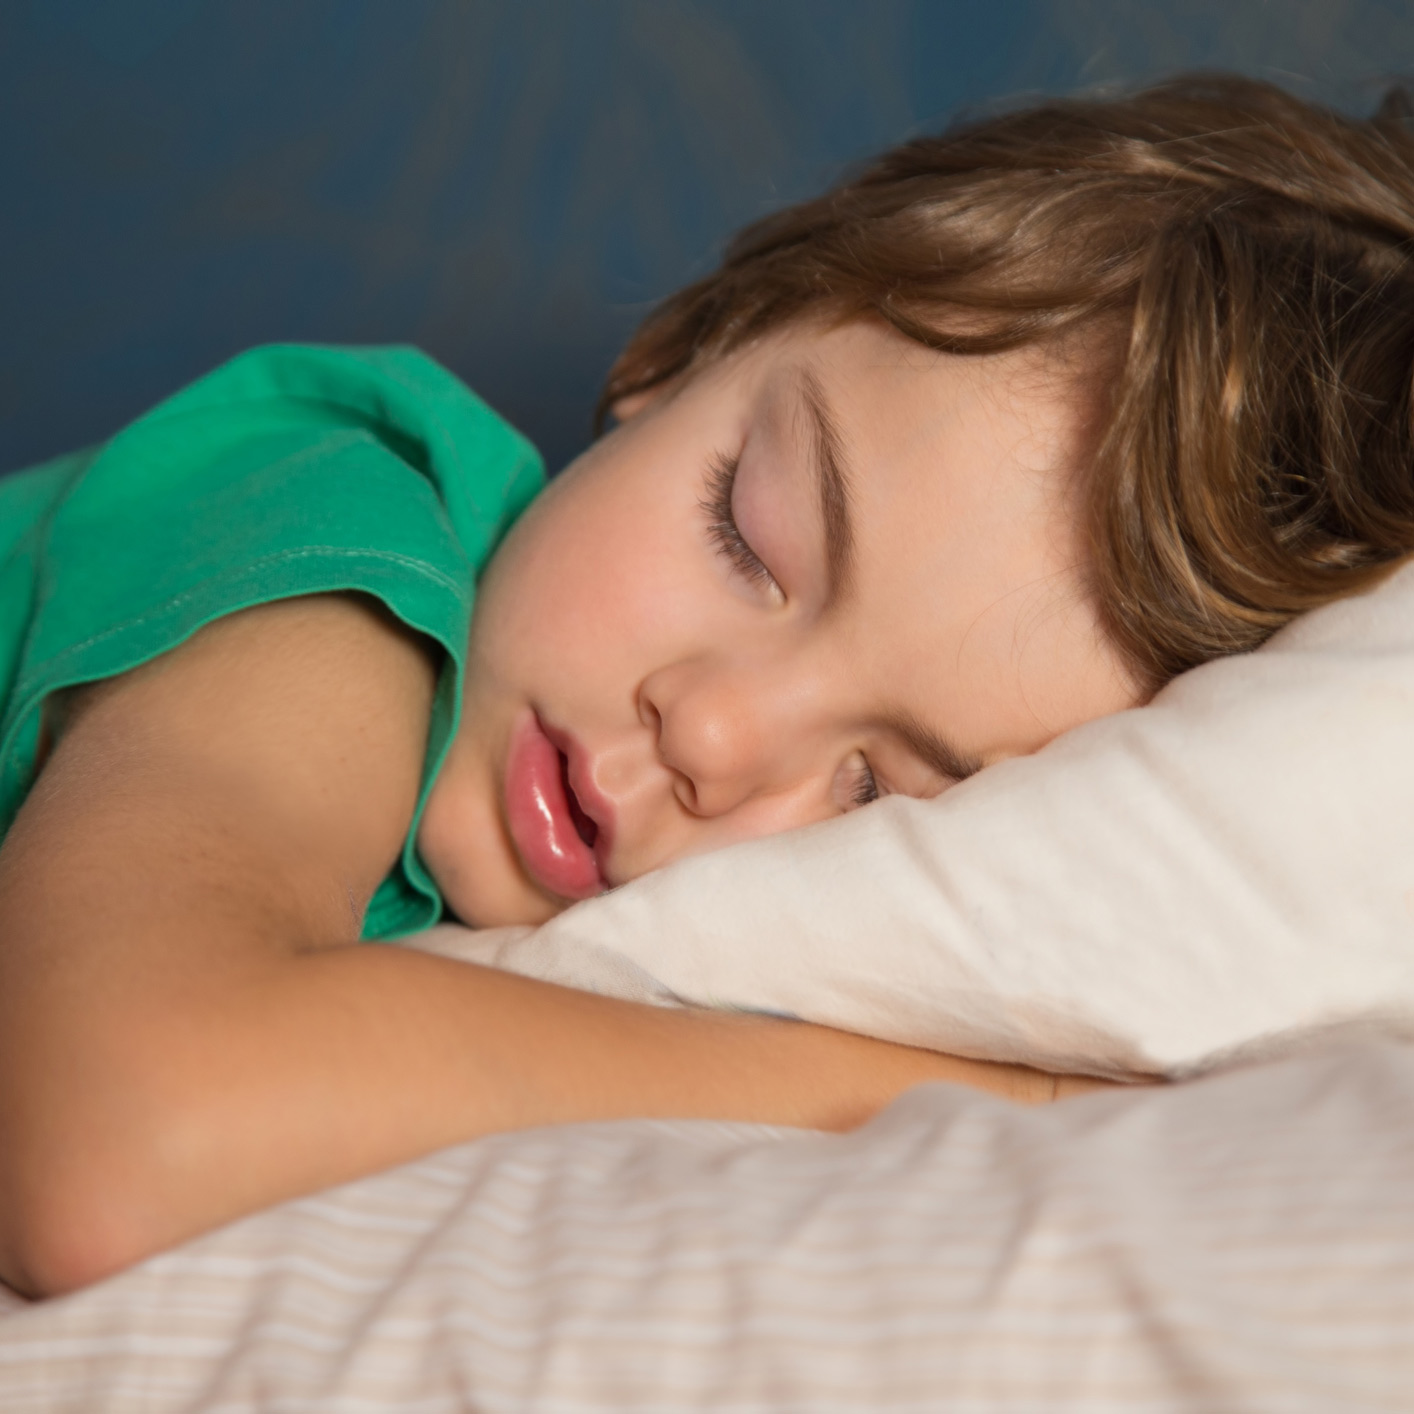 Tips to prevent bedwetting | My Southern Health